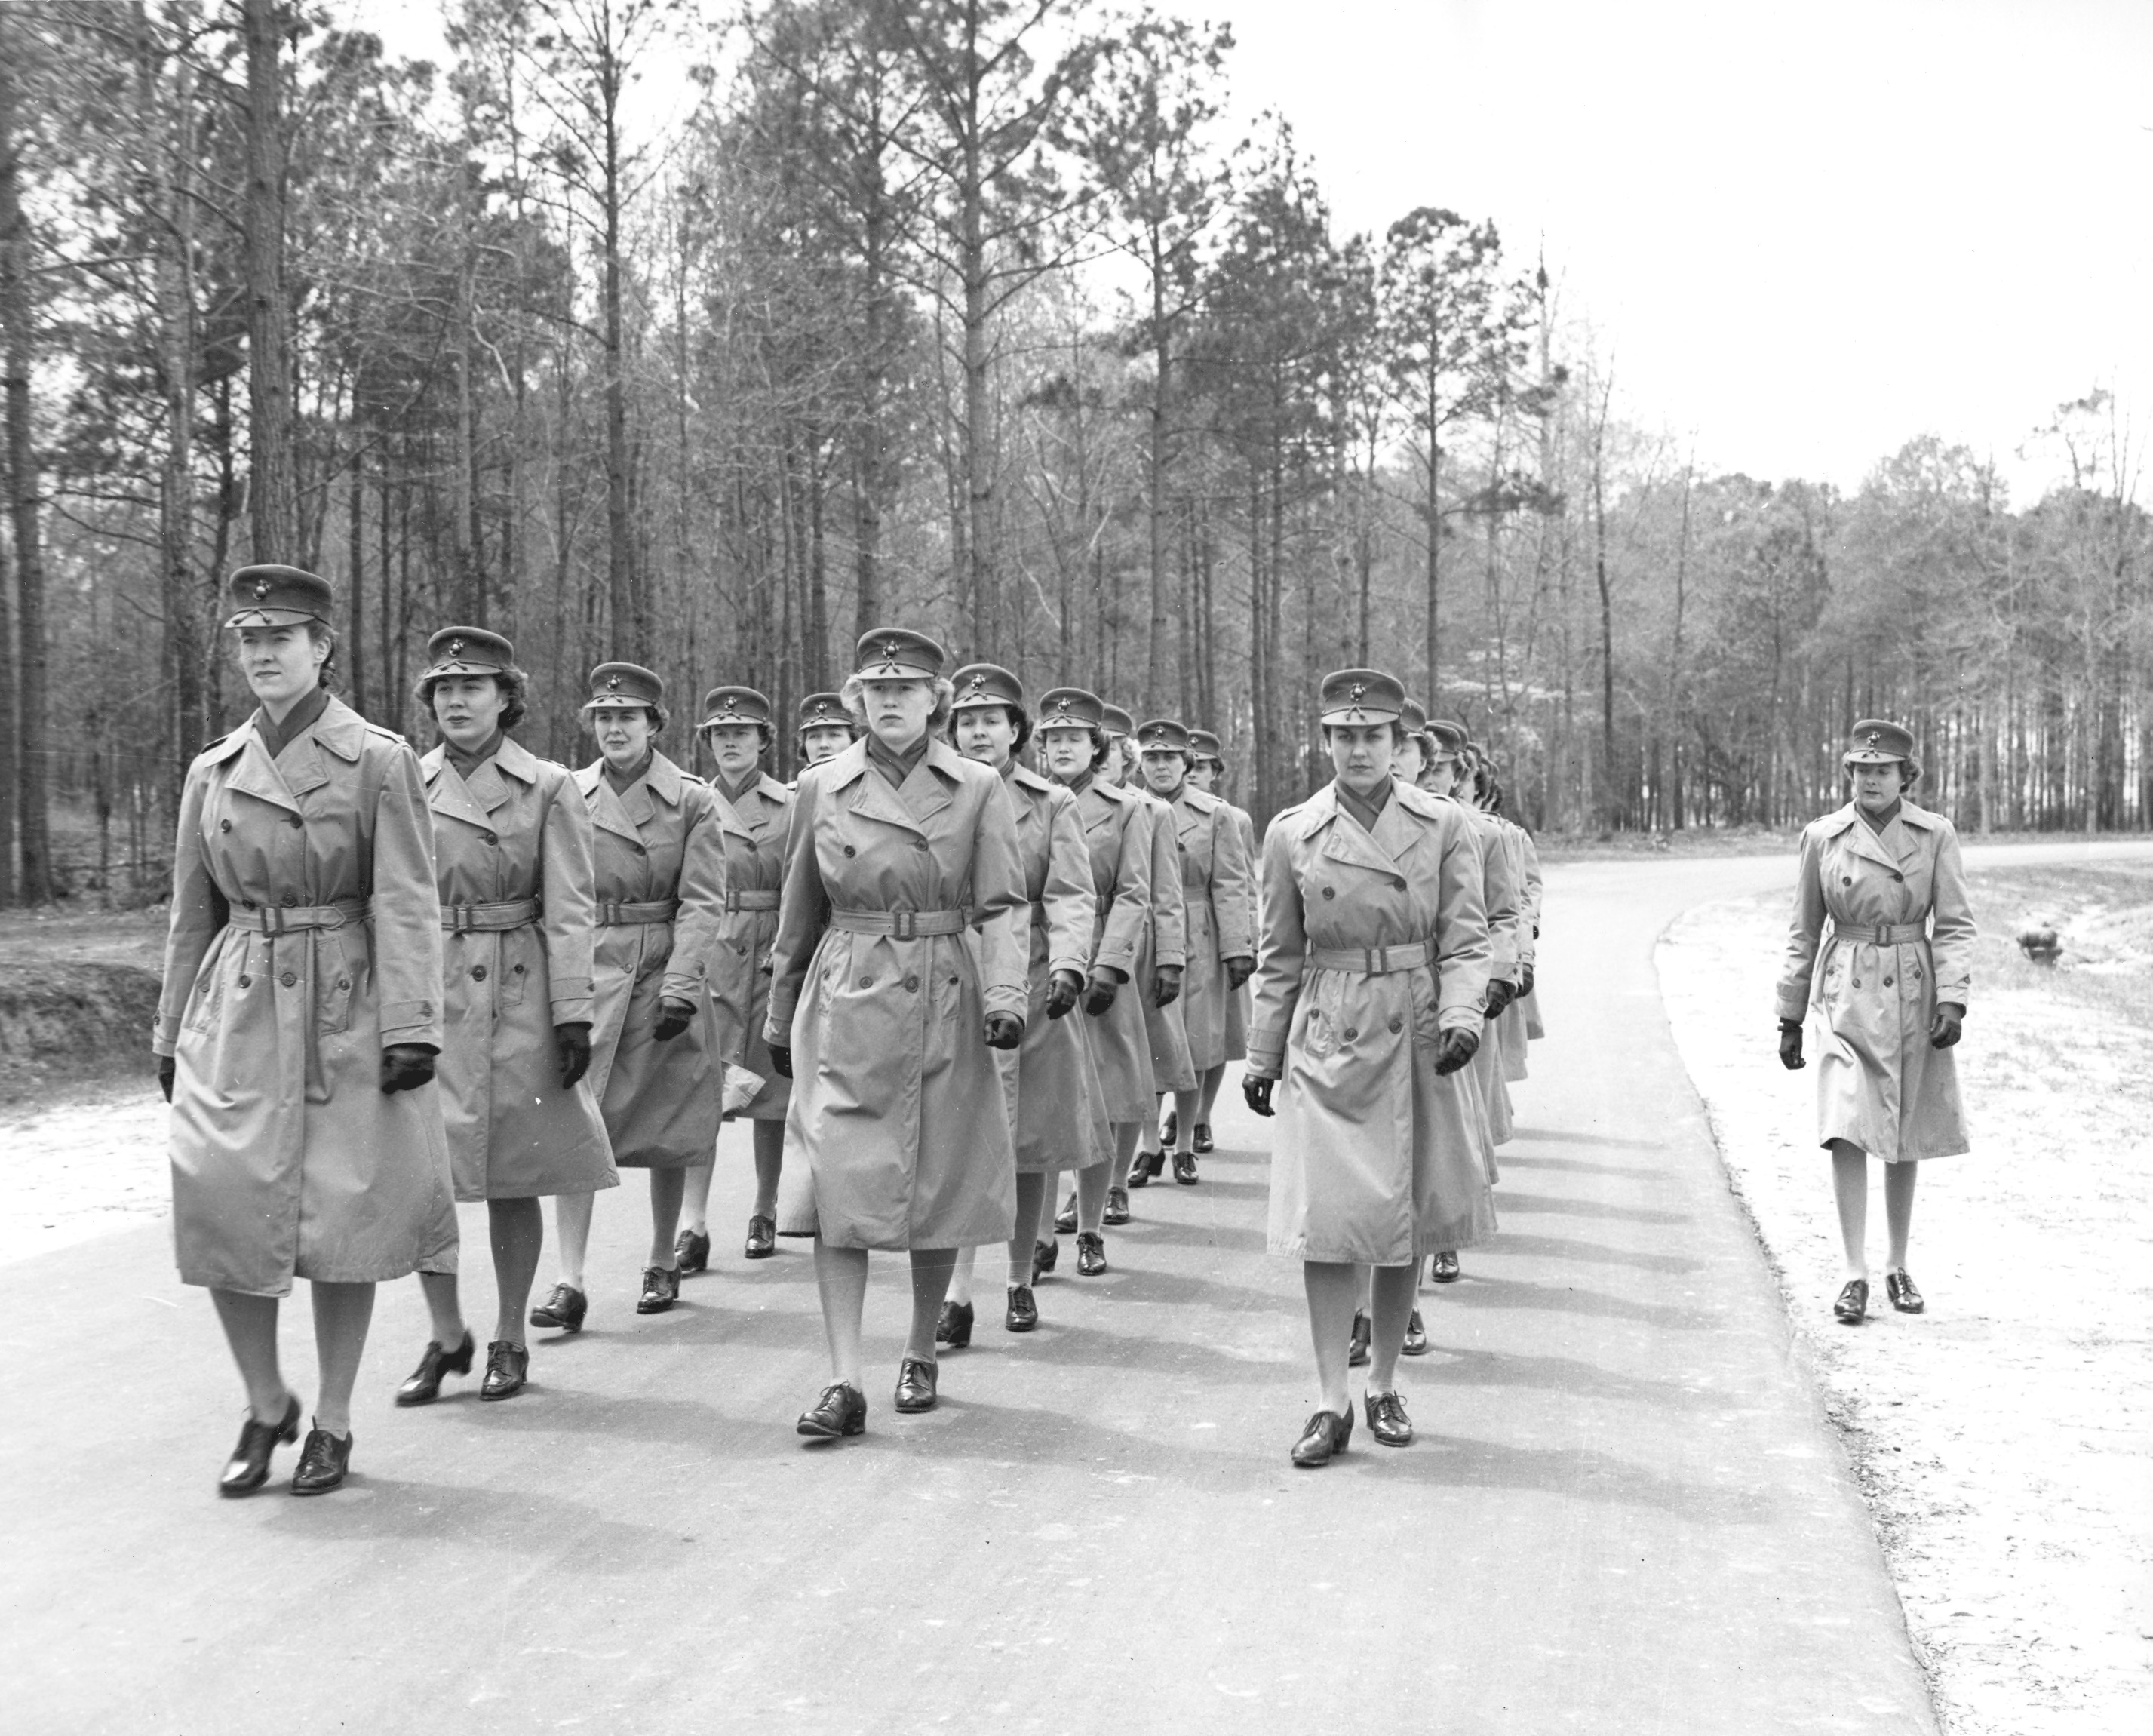 Women Marine Officers Marching at Camp Lejeune